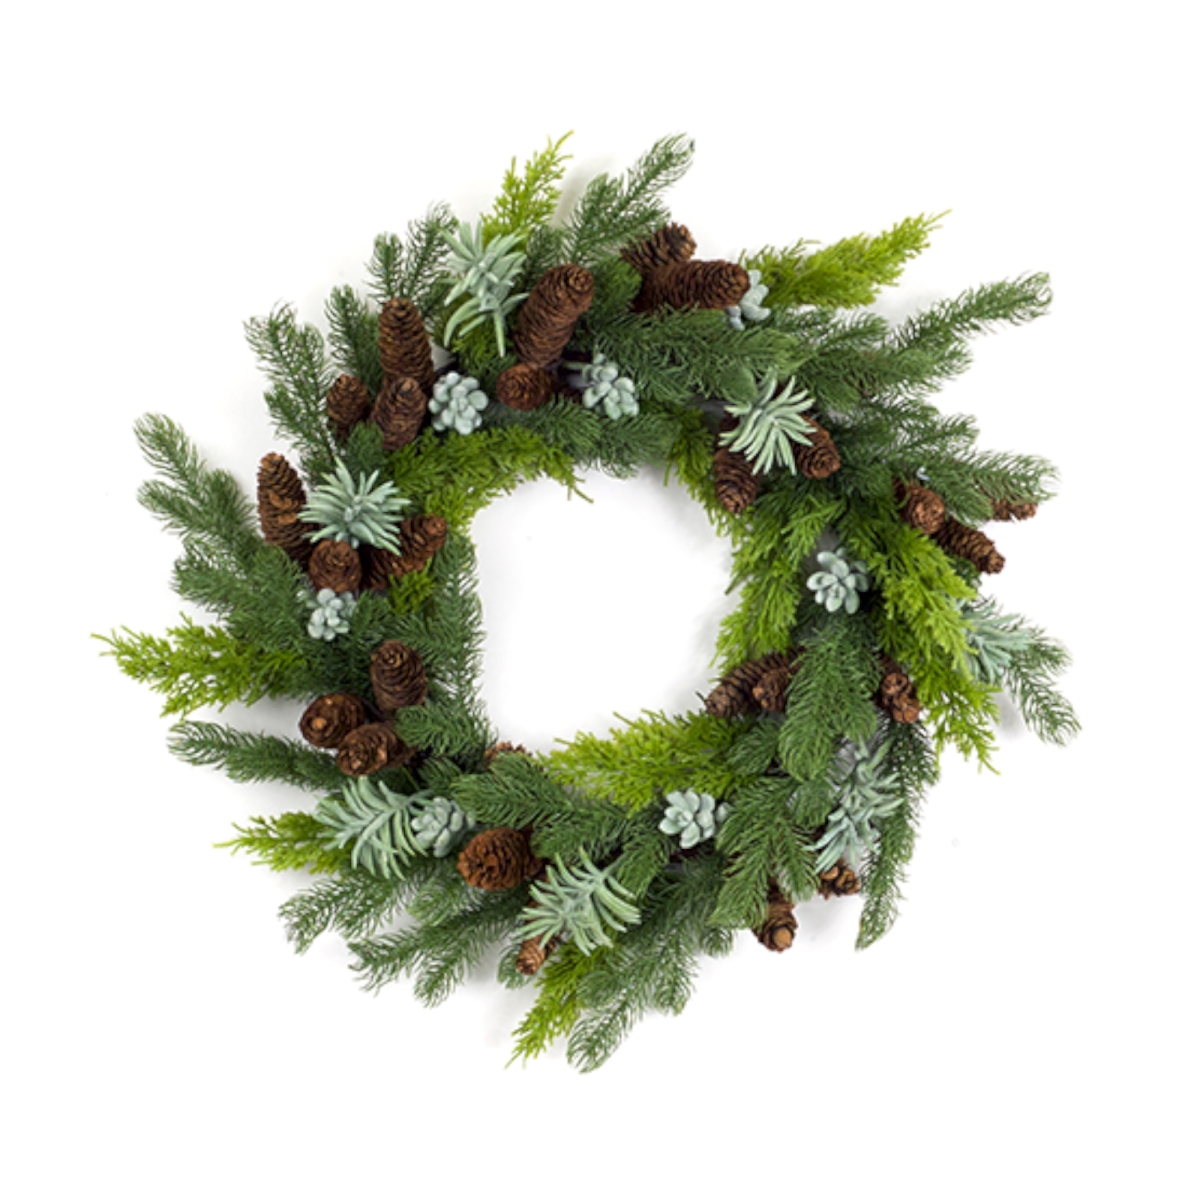 72012ds 24 X 6 In. Plastic Mixed Pine & Succulent Wreath, Green & Brown